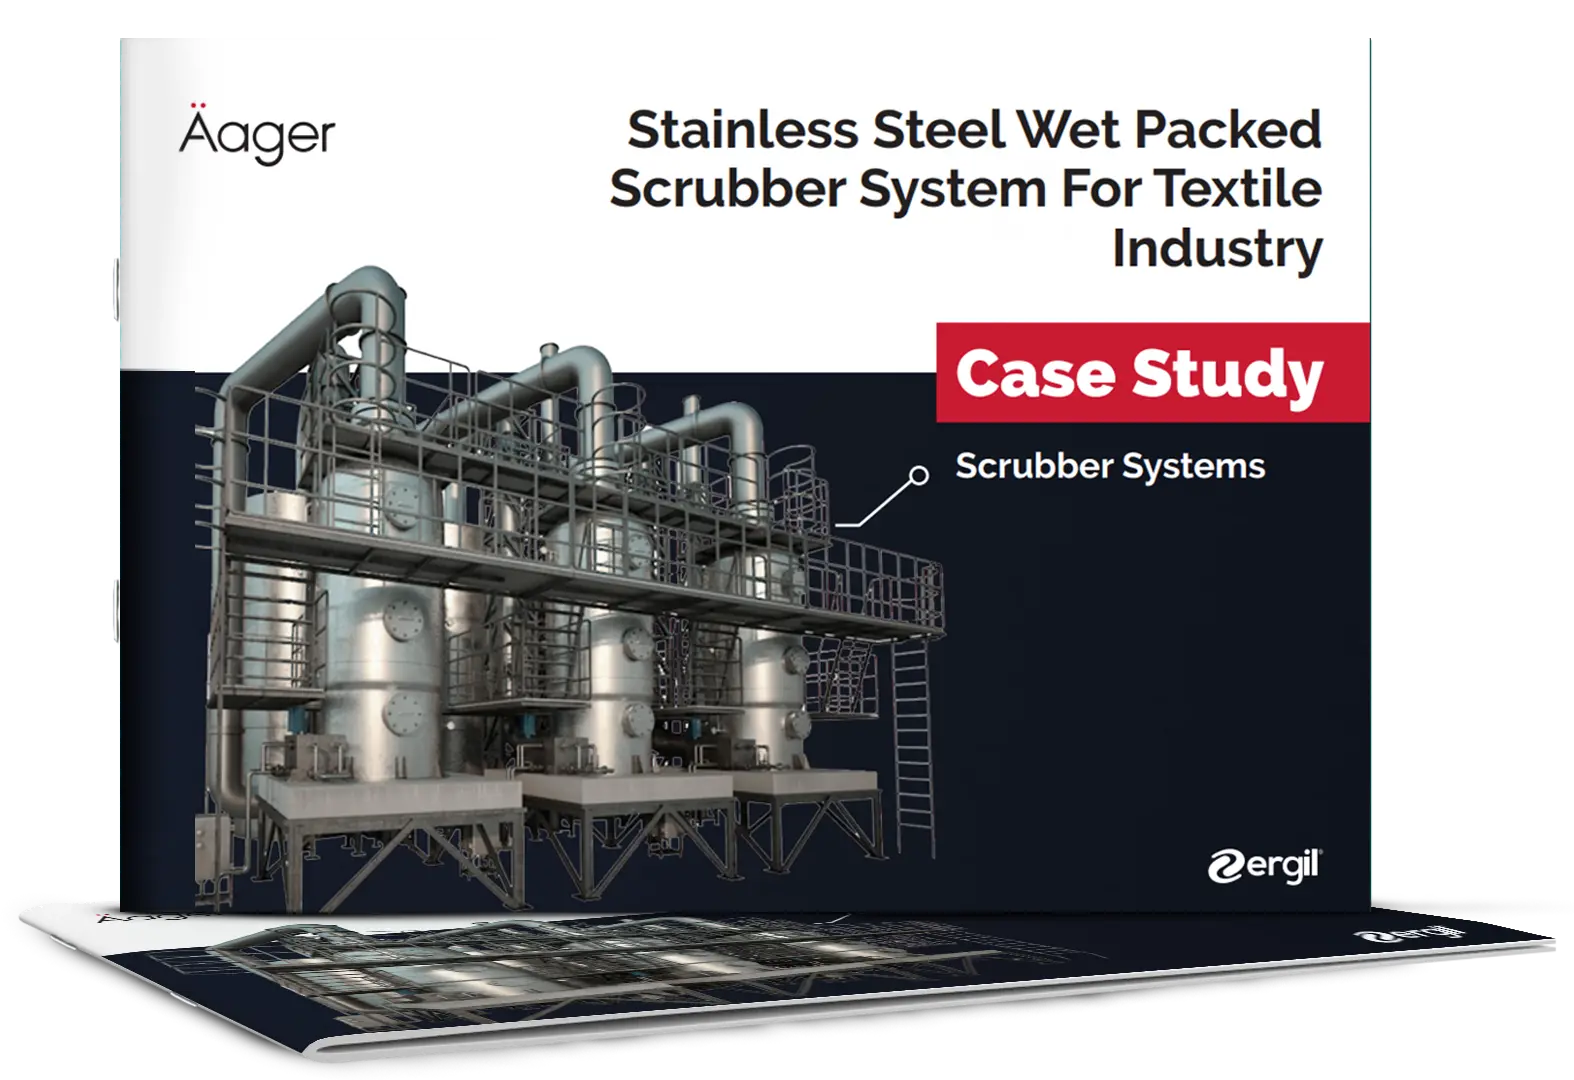 Stainless Steel Wet Packed Scrubber System for Textile Industry 30